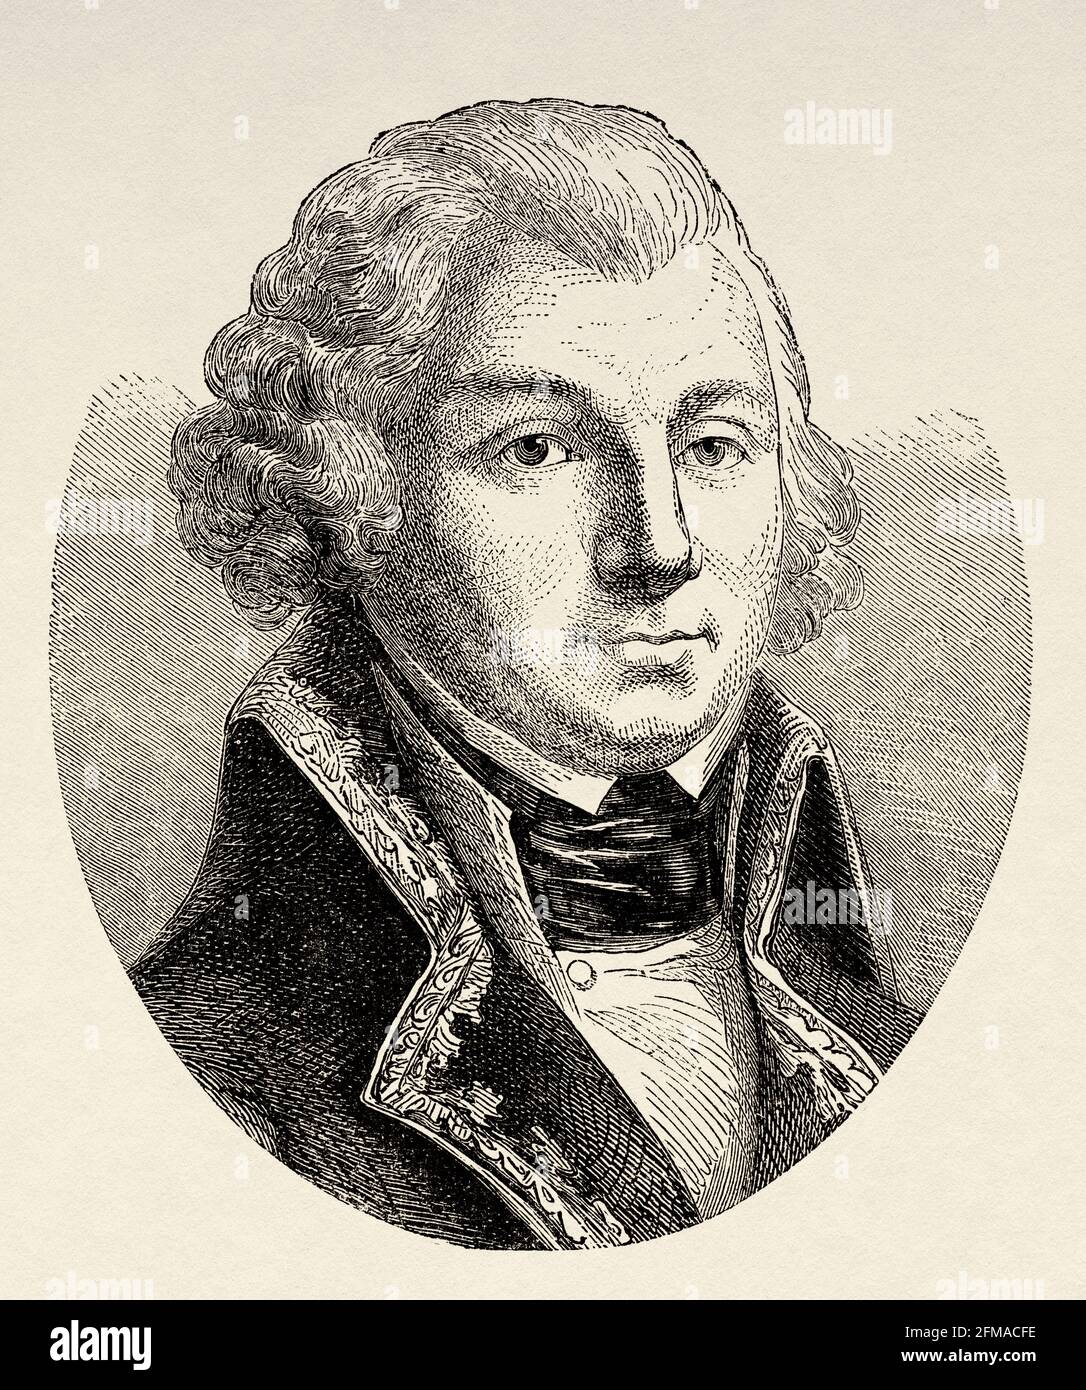 Portrait of Jean-Baptiste Jourdan (1762-1833) 1st Count Jourdan, was a French military commander. Marshal of the Empire by Emperor Napoleon I in 1804. France. Old 19th century engraved illustration from Histoire de la Revolution Francaise 1876 by Jules Michelet (1798-1874) Stock Photo